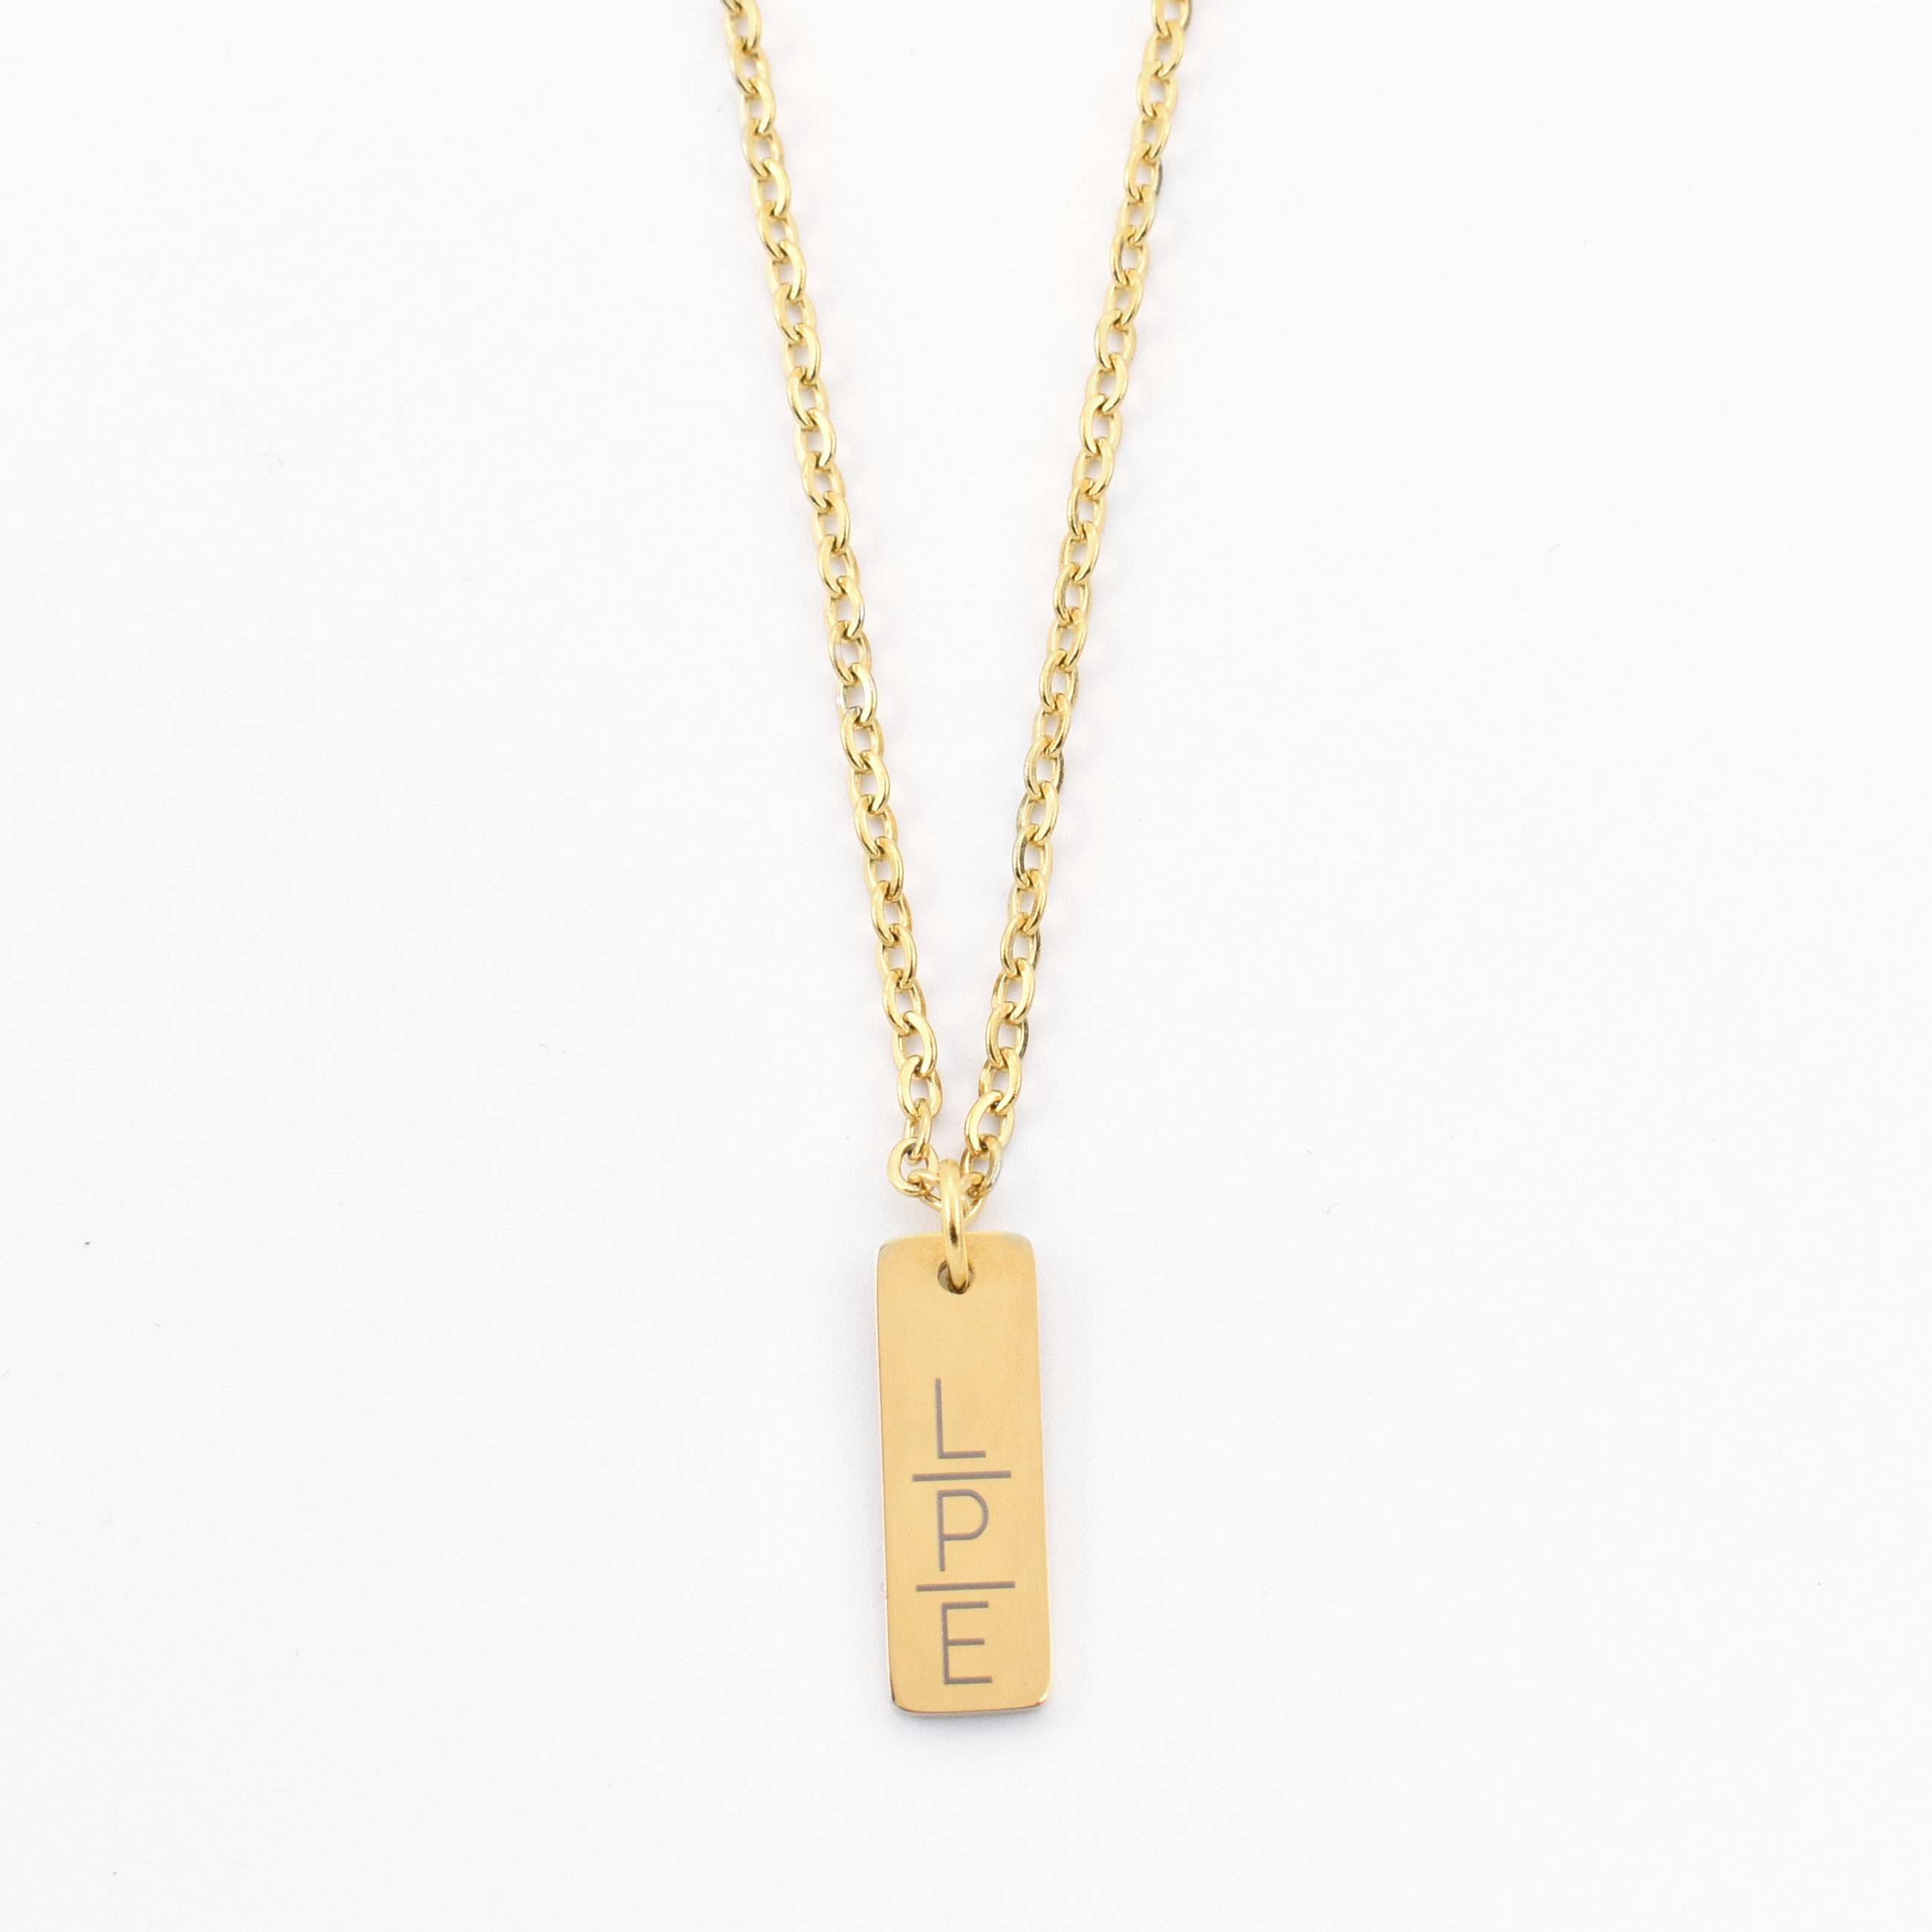 Initials necklace man rectangle